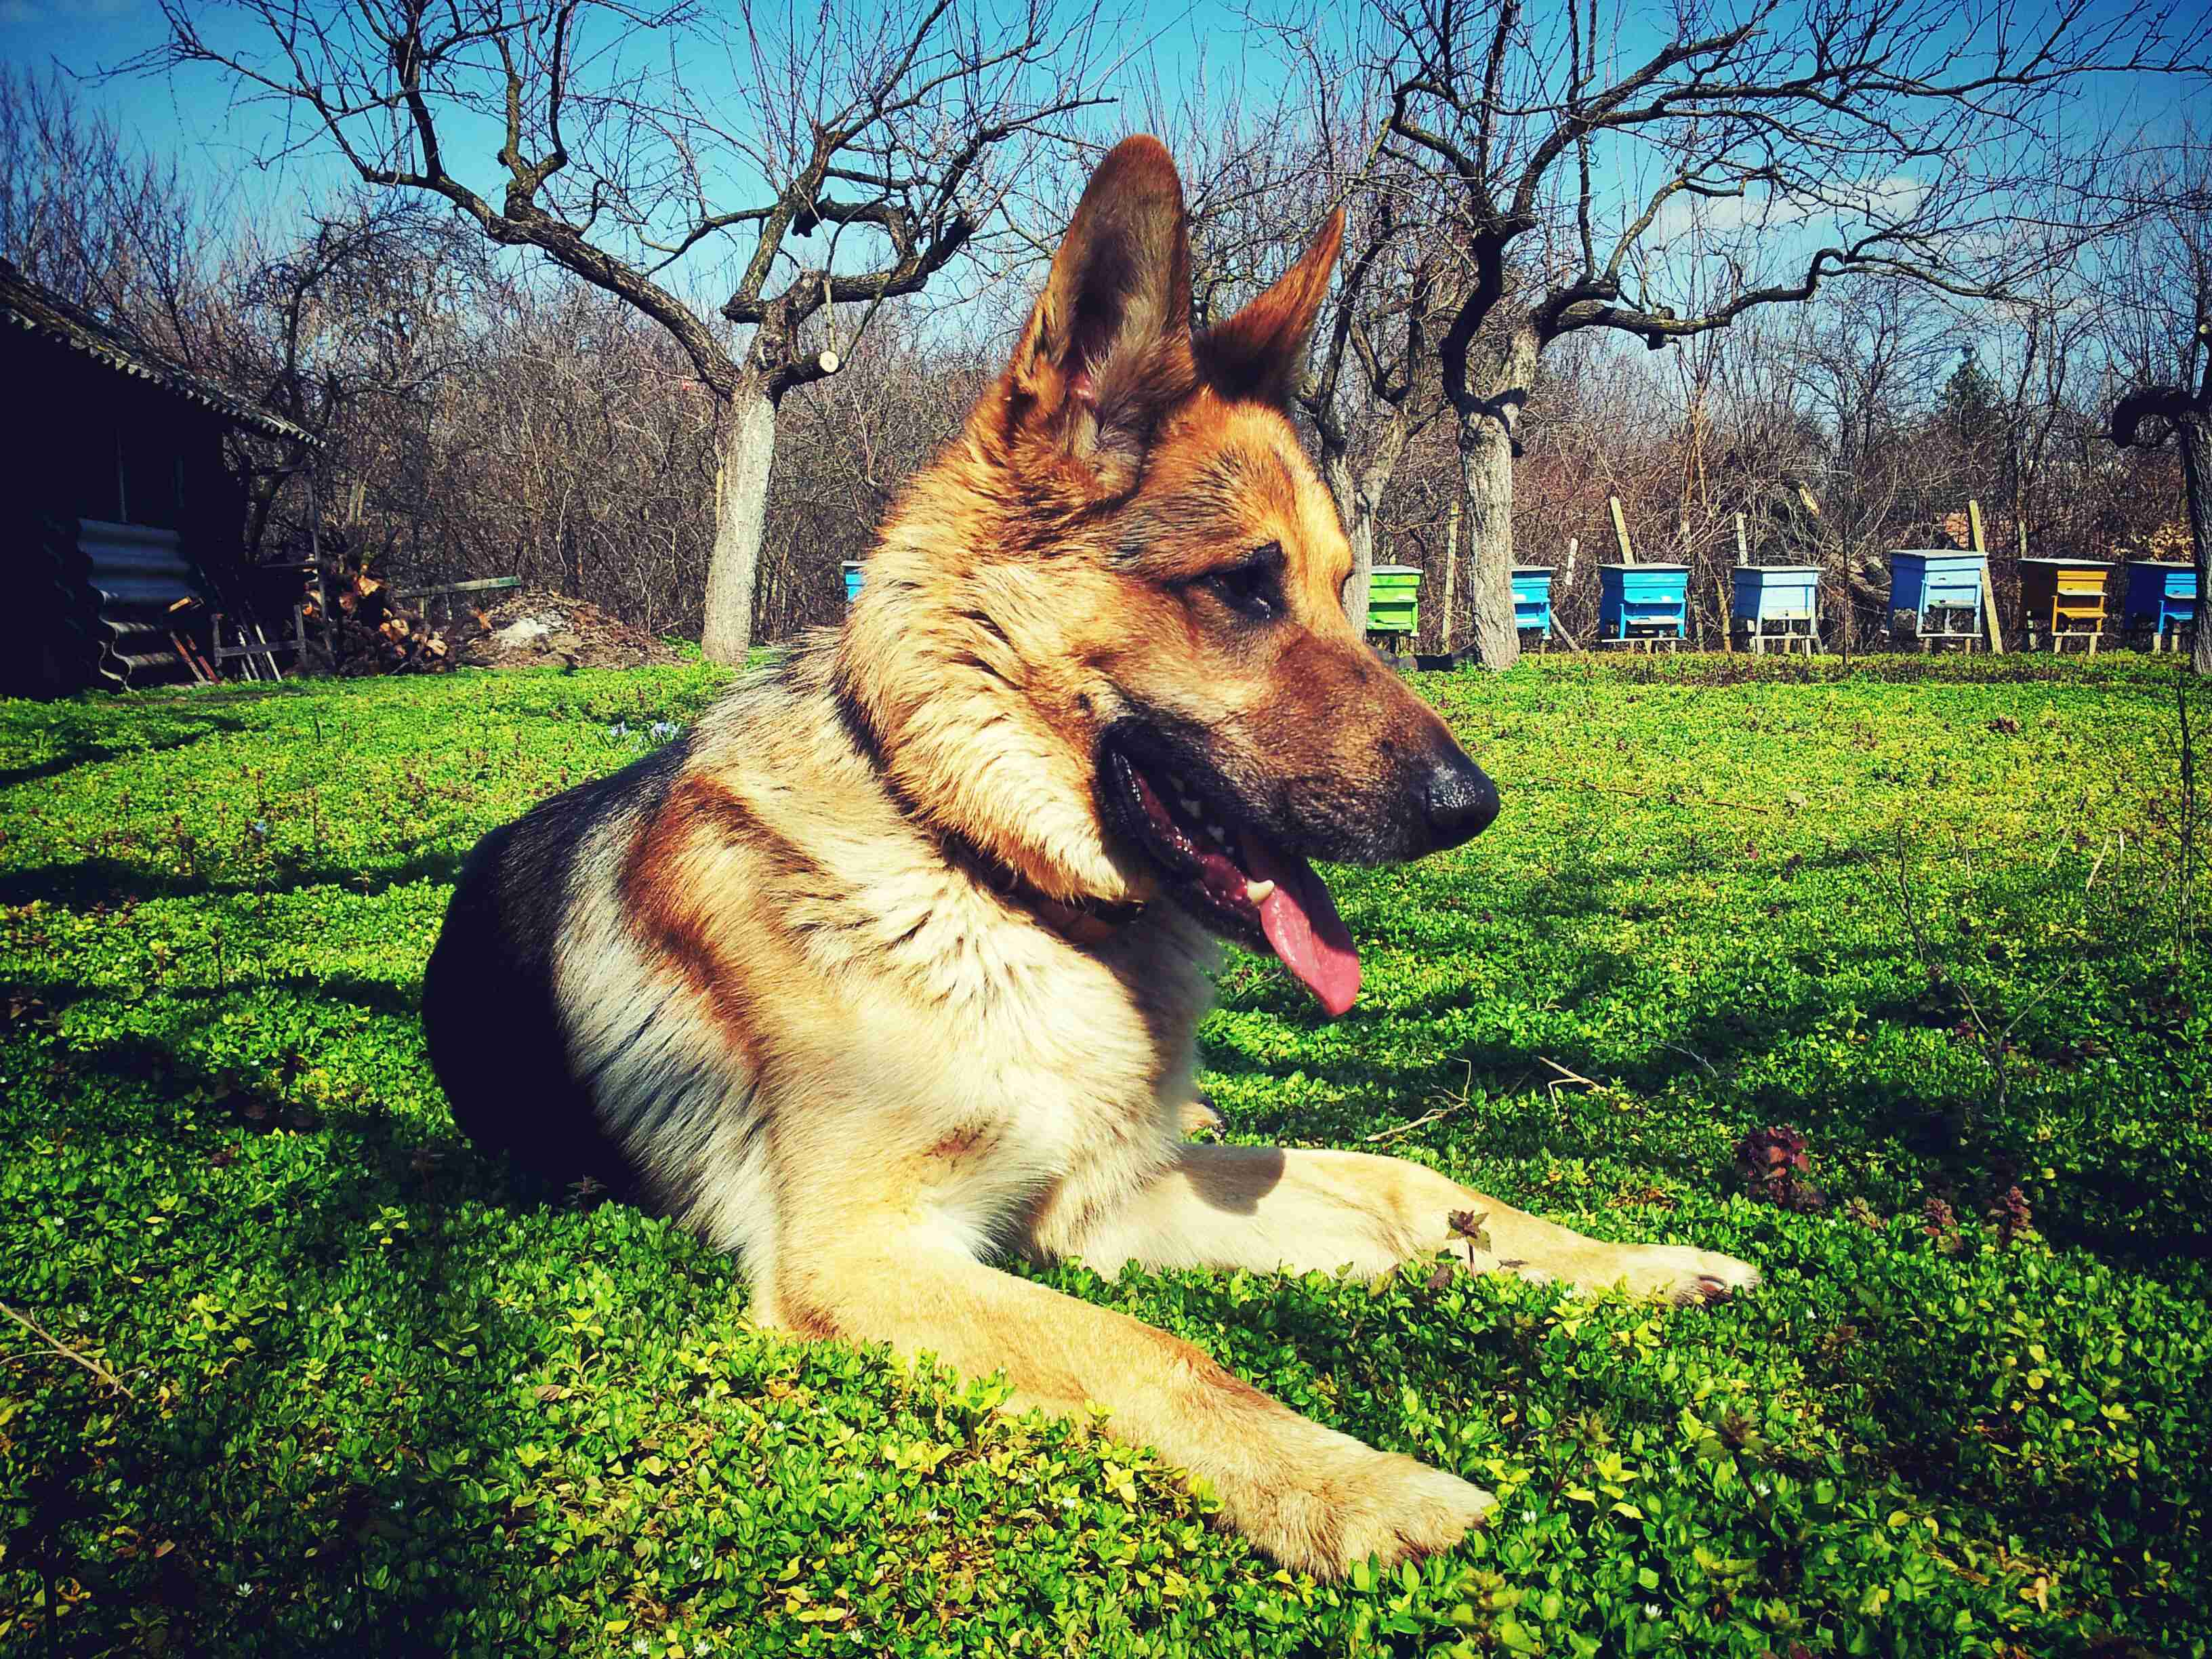 Can German shepherds be trained to run alongside a bike or for jogging?